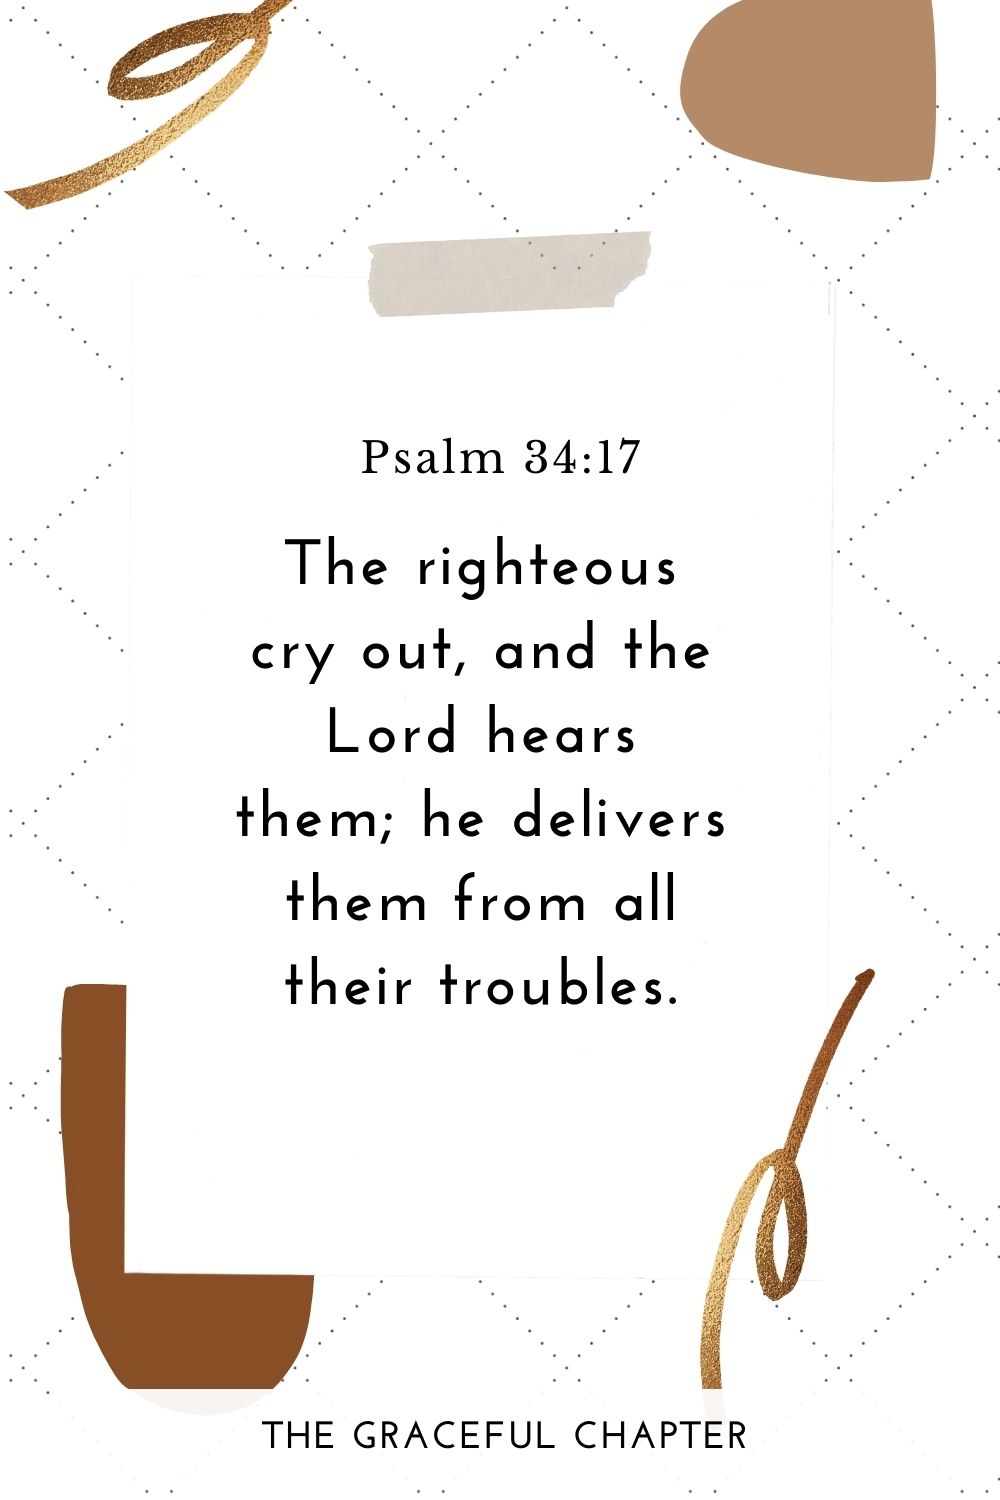 The righteous cry out, and the Lord hears them; he delivers them from all their troubles. Psalm 34:17